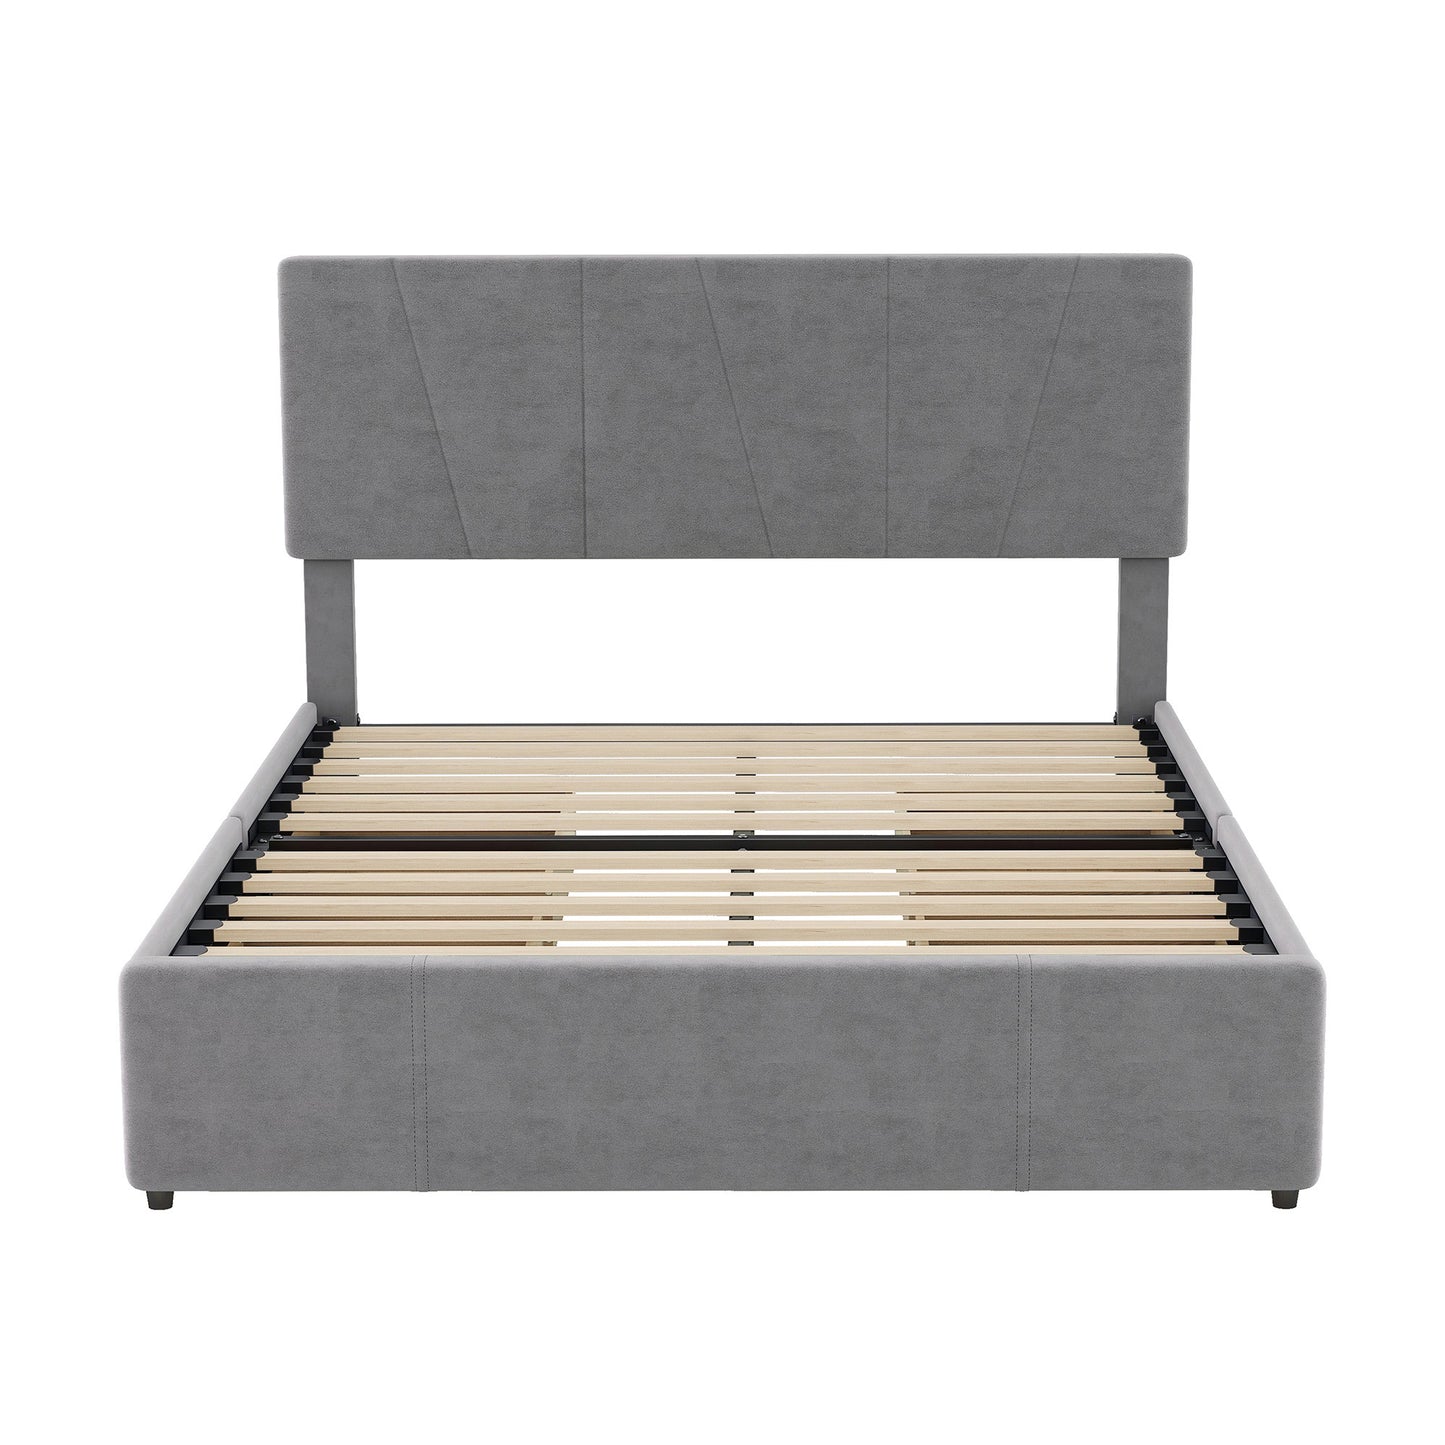 Full Size Upholstery Platform Bed with Four Drawers on Two Sides, Adjustable Headboard, Grey